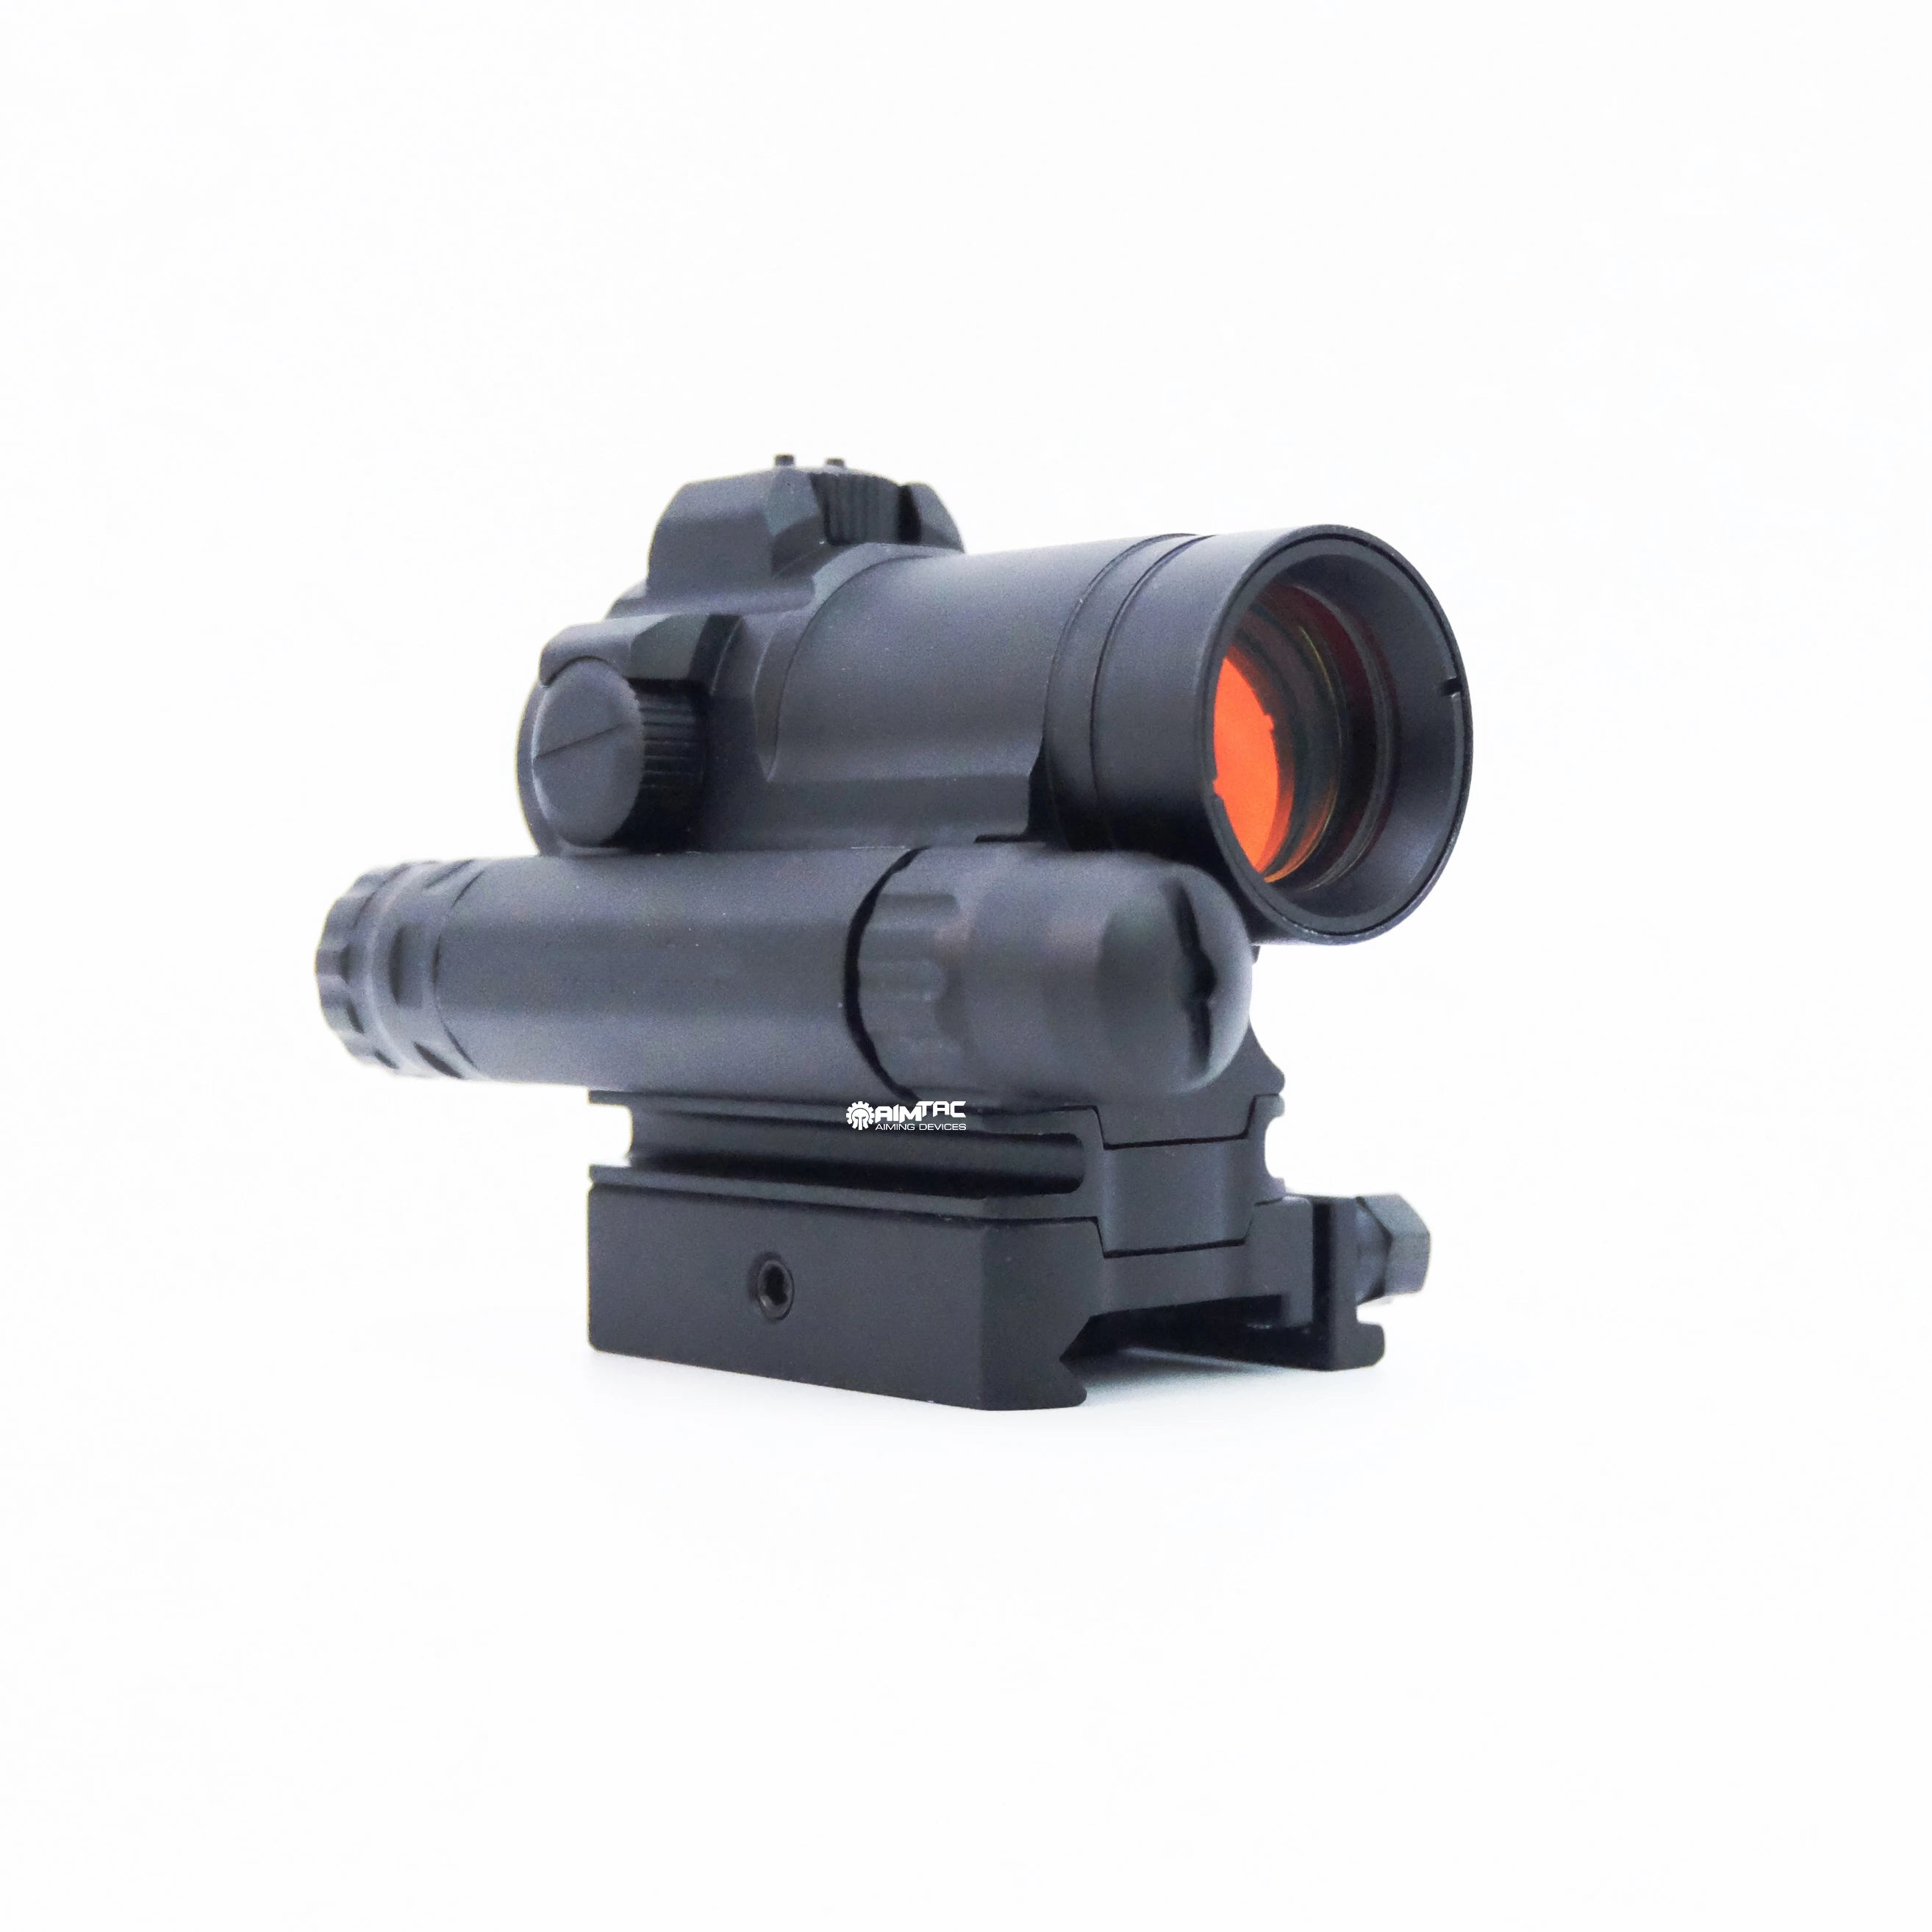 Aimtac m5s Red Dot Sight 1X20 Sights Reflex With 20mm Rail Mount